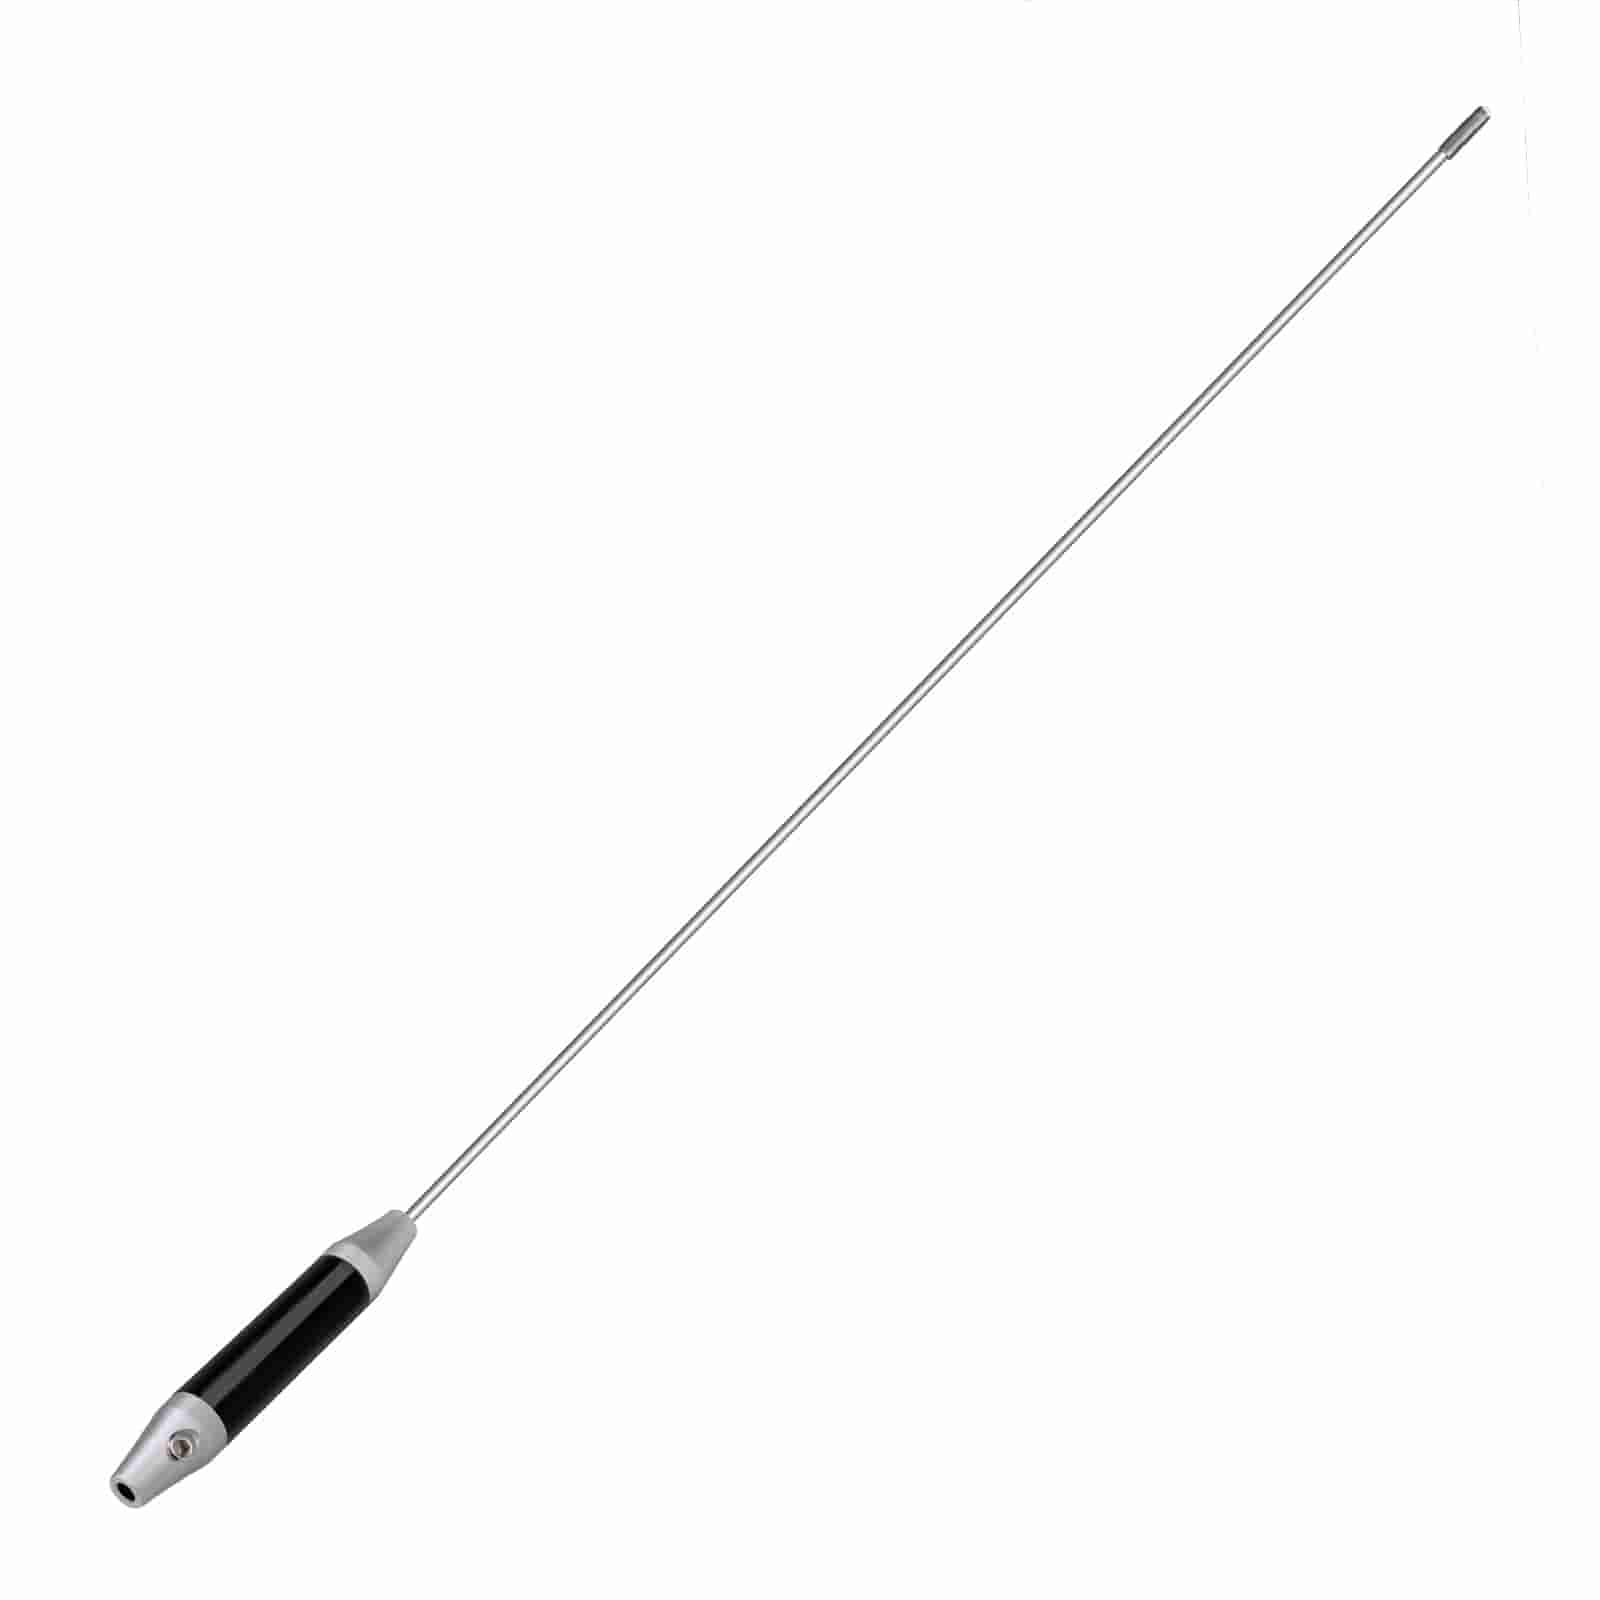 MA07 Stainless Steel Antenna from GMRS Mobile Car Radio Station